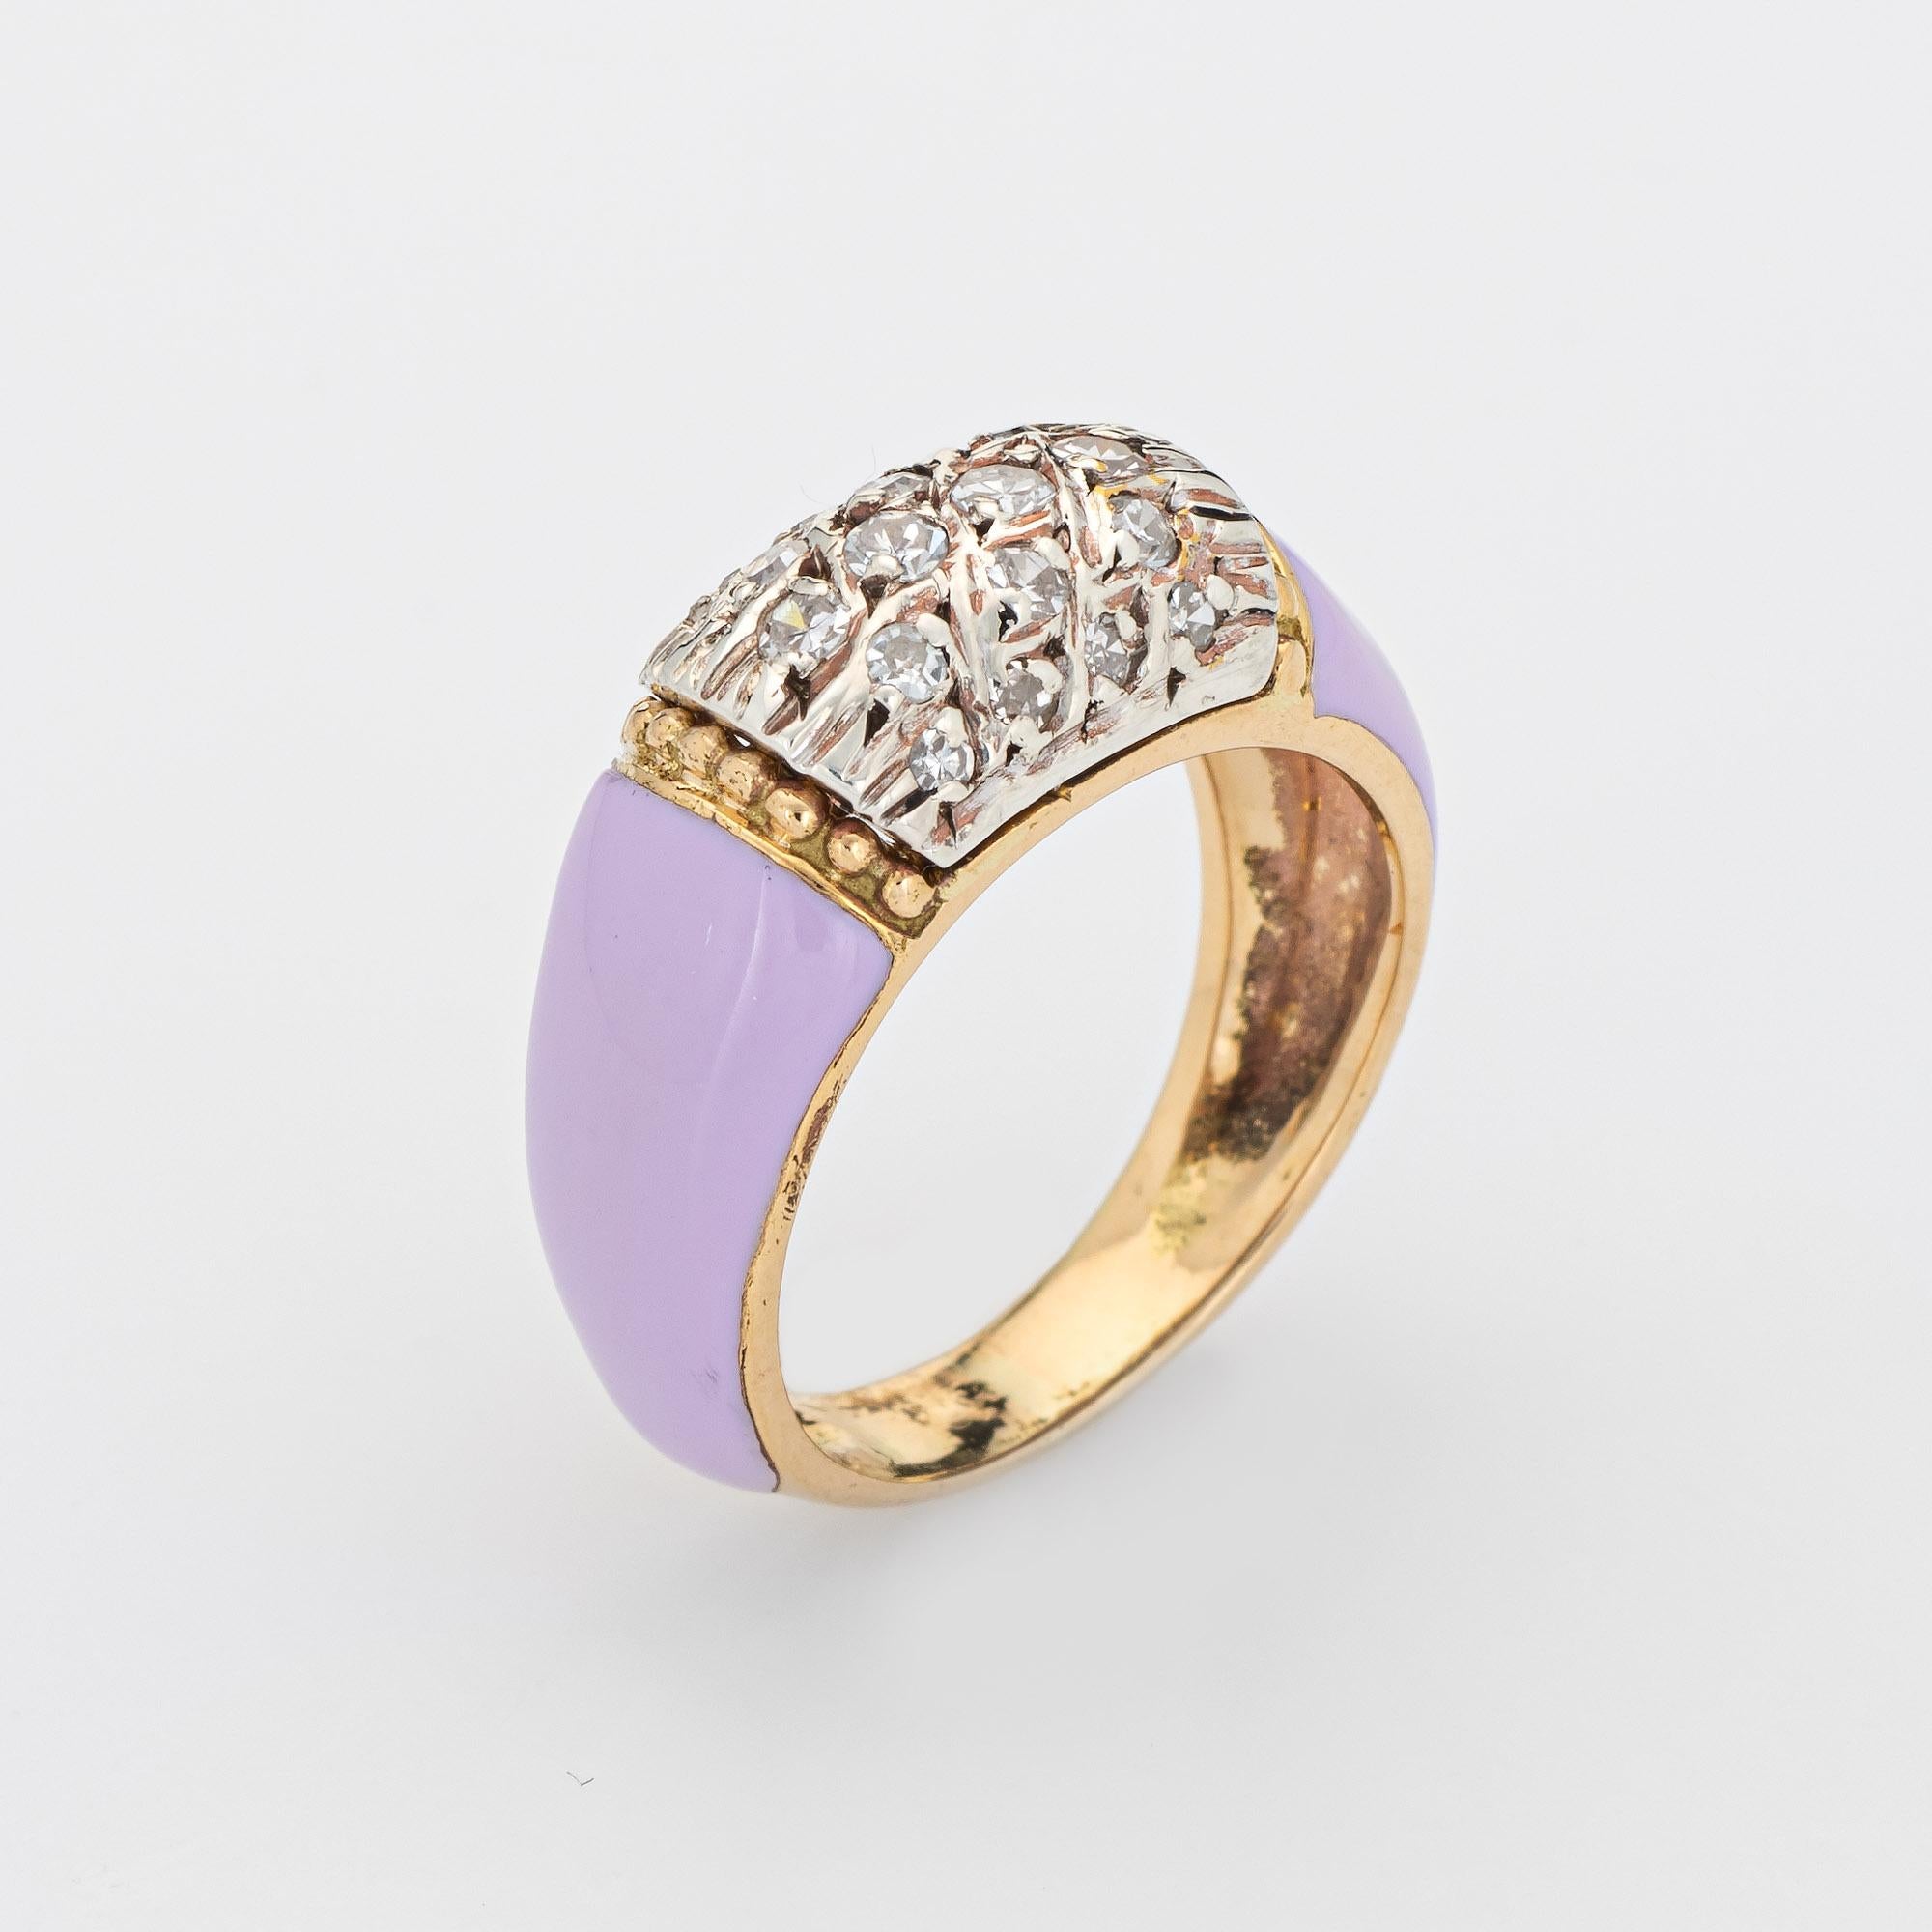 Stylish vintage lilac enamel & diamond ring (circa 1970s to 1980s) crafted in 18 karat yellow gold. 

Single cut diamonds total an estimated 0.20 carats (estimated at H-I color and SI1-2 clarity). The enamel is in very good condition and free of